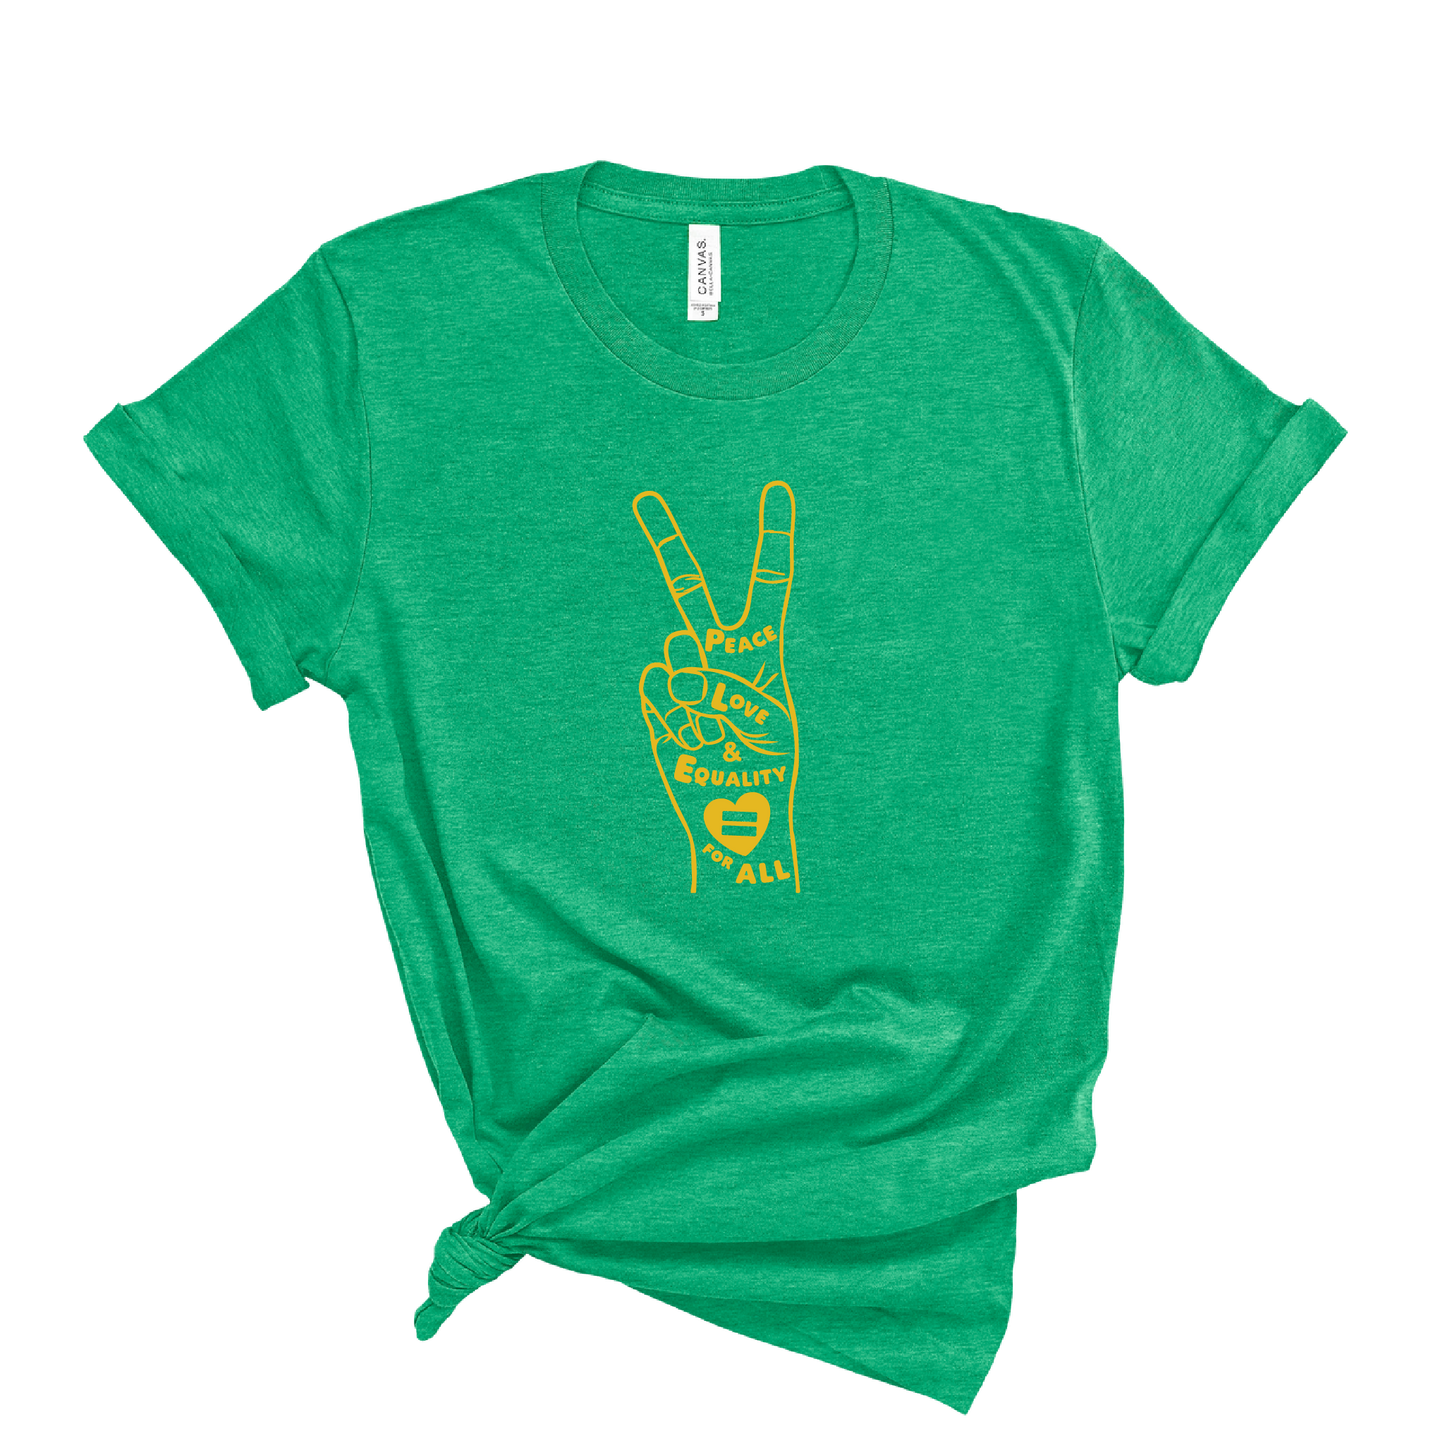 Peace, Love, and Equality T-shirt